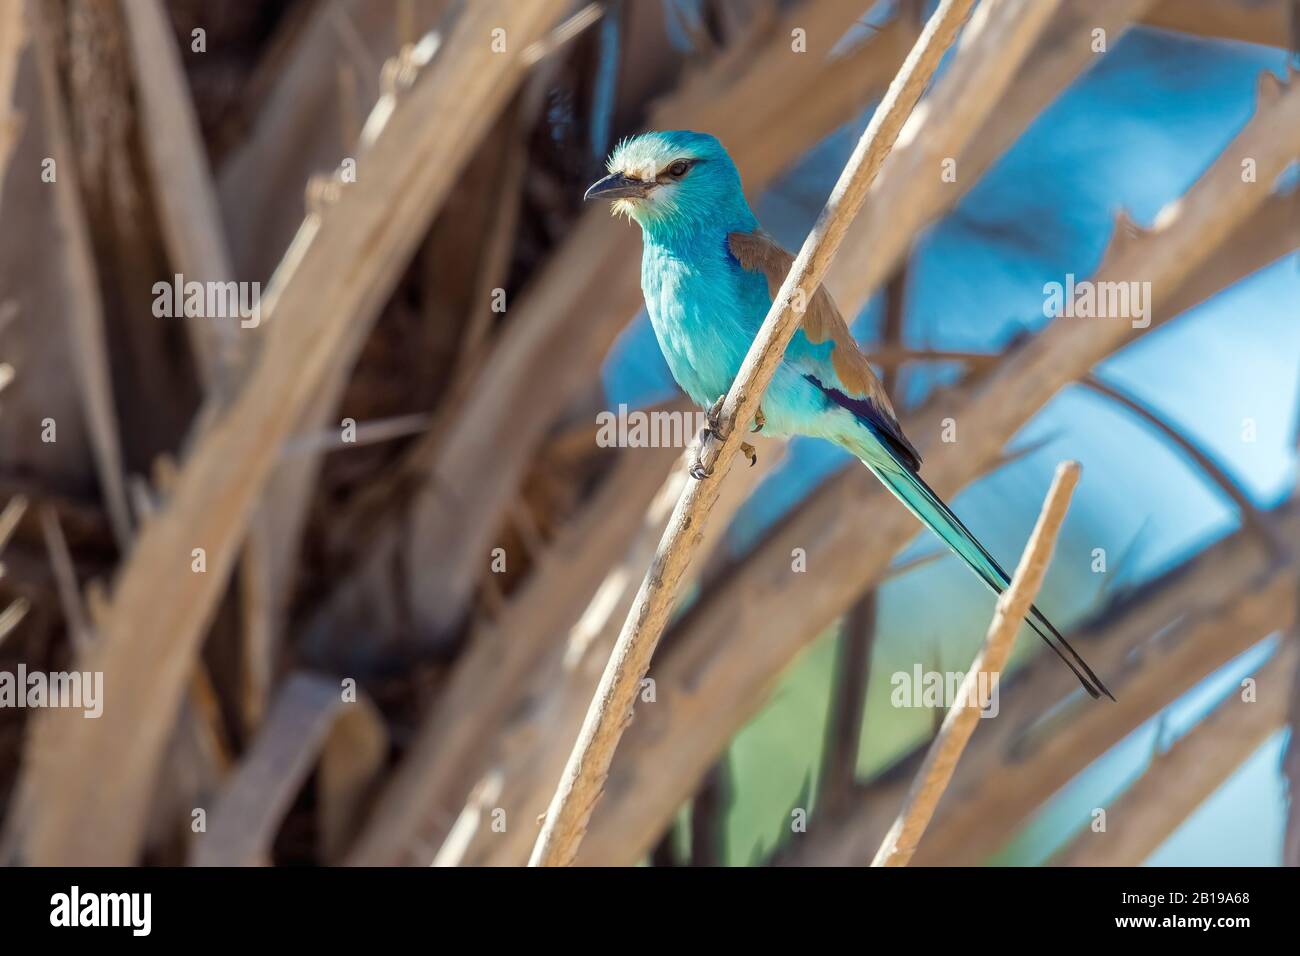 Abyssinian roller, Lilac-breasted roller (Coracias abyssinica, Coracias abyssinicus), perched on a palmtree, Mauritania Stock Photo